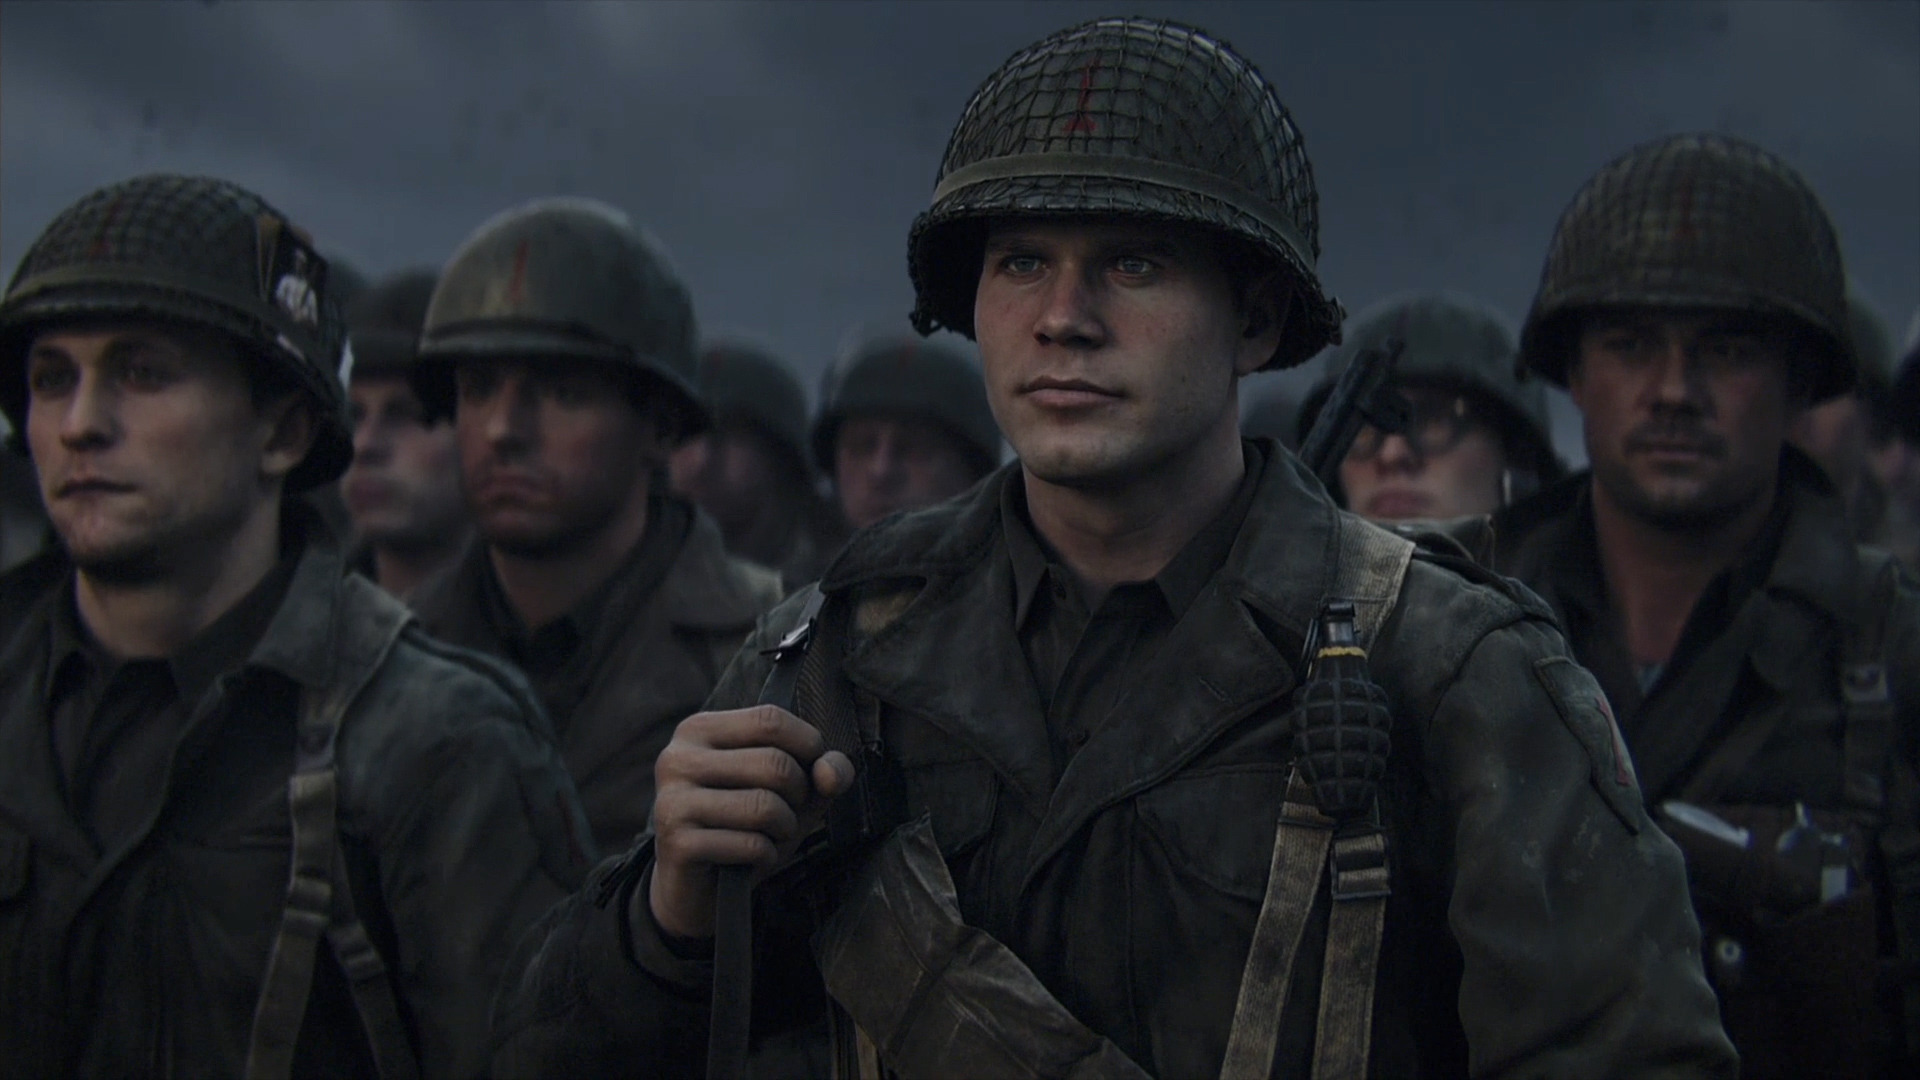 Call of Duty: WWII Review - World Bore Two